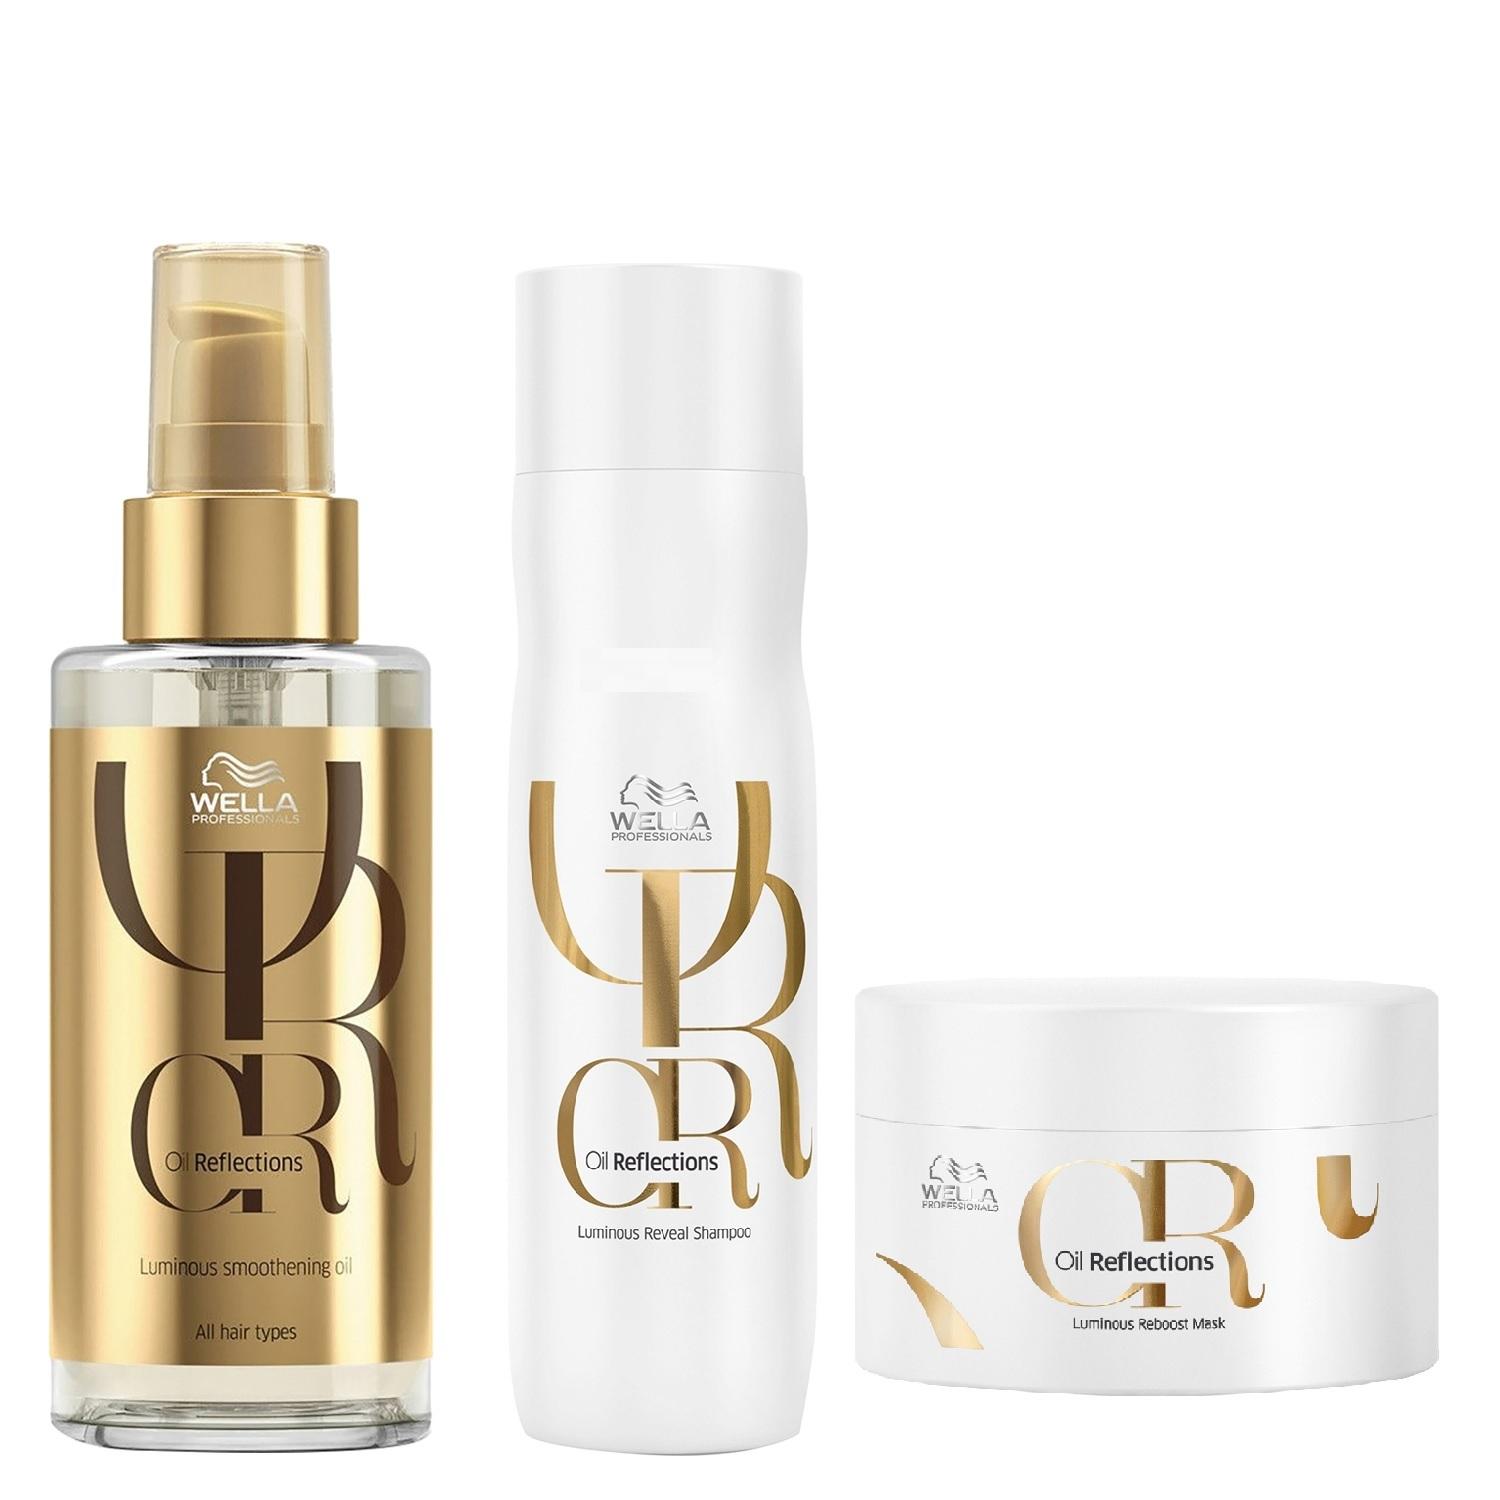 Wella Professionals | Wella Professionals Oil Reflections Luminous Reveal Shampoo, Mask, Oil for shiny hair- combo of 3